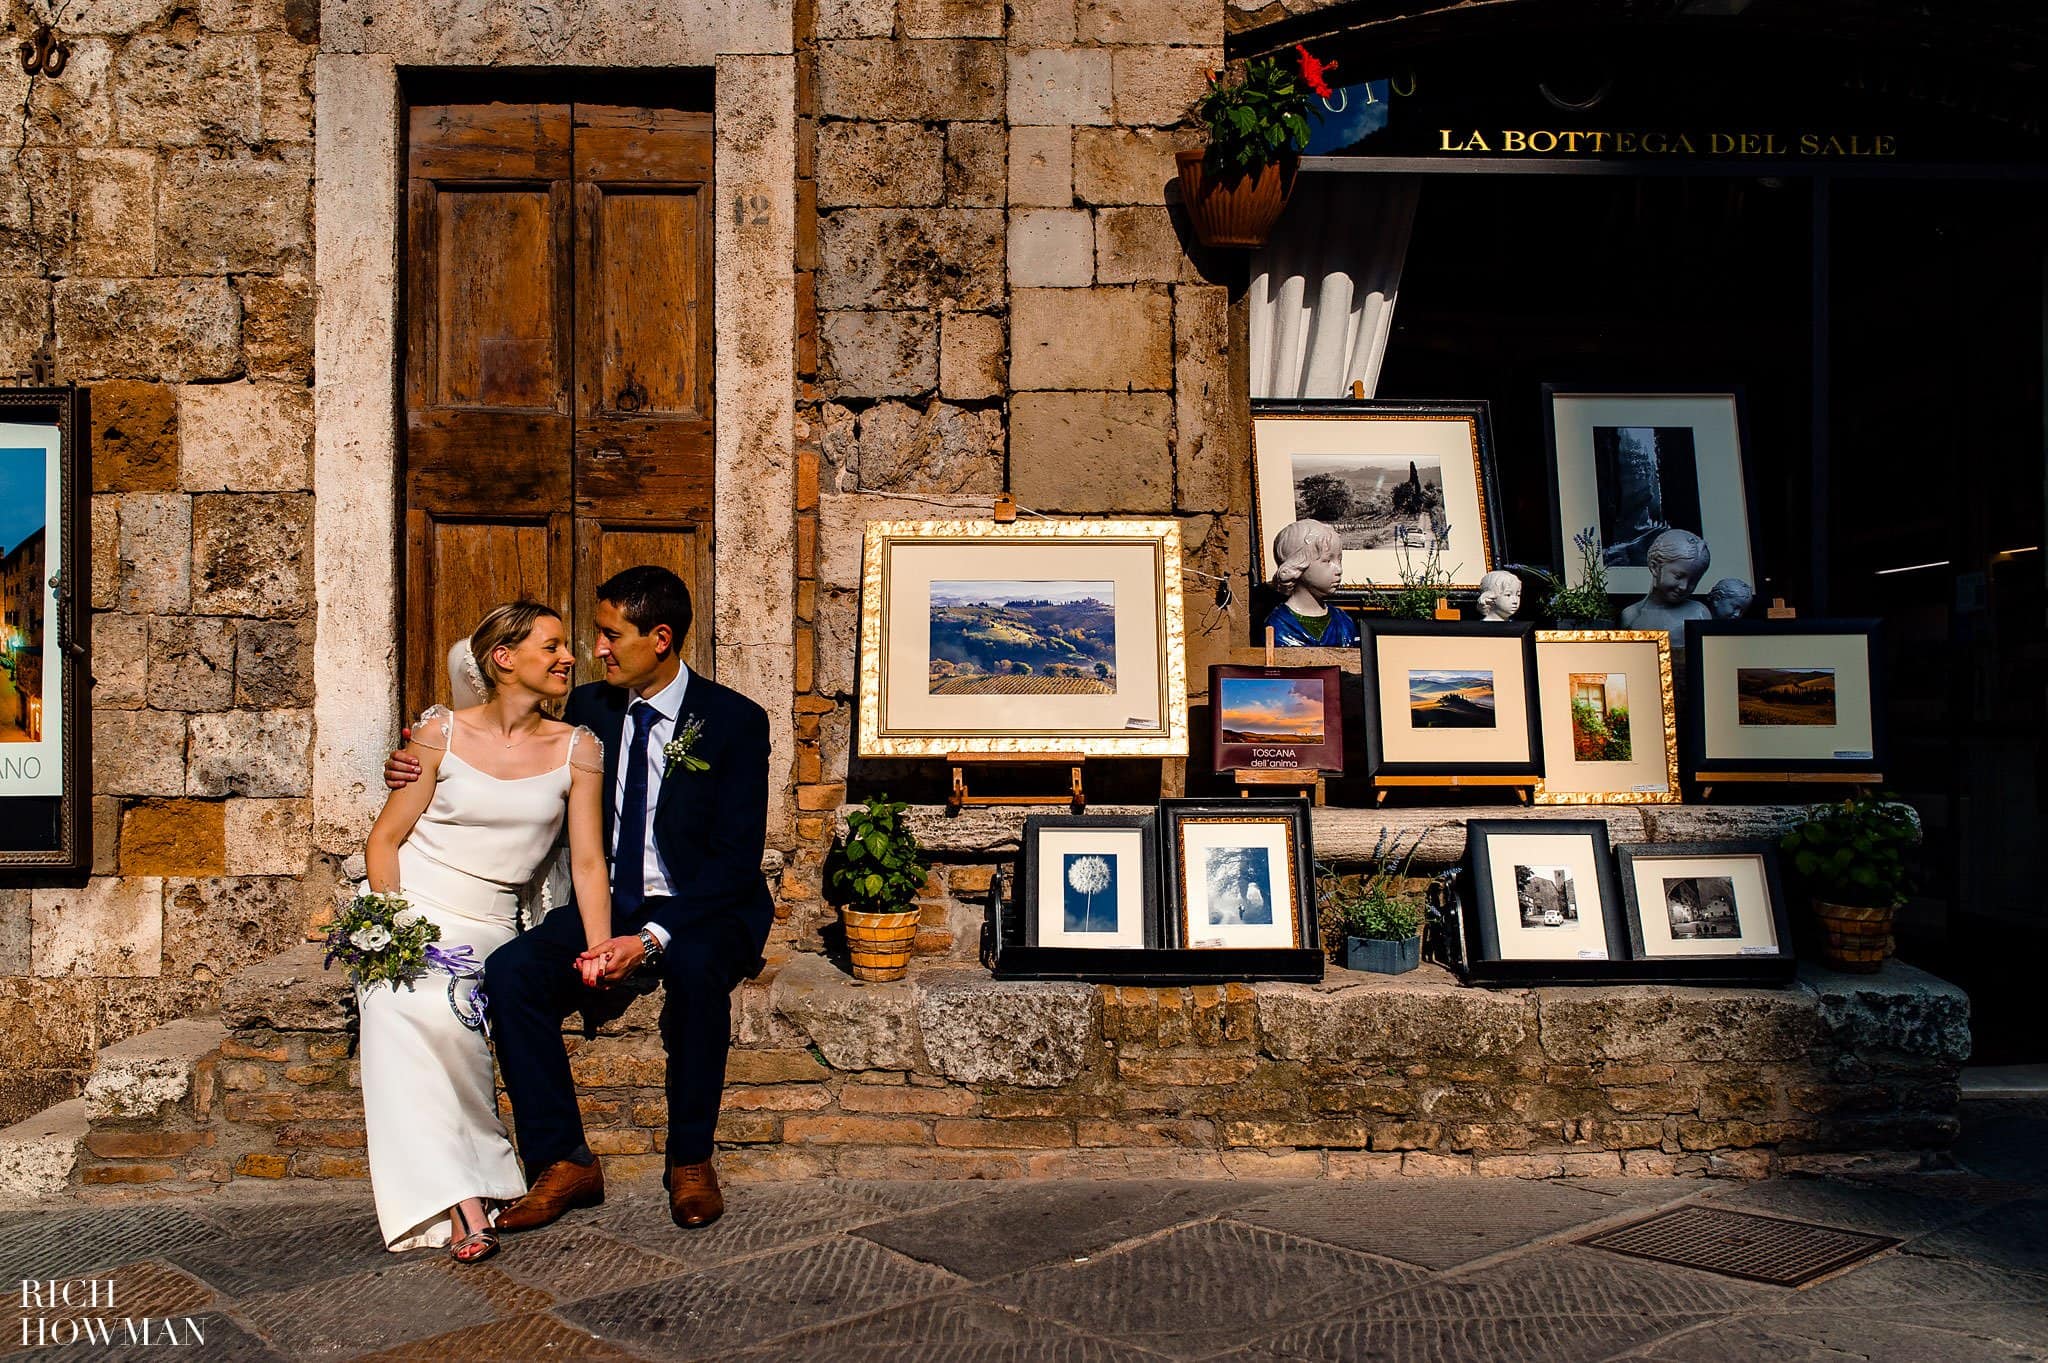 Get married in San Gimignano